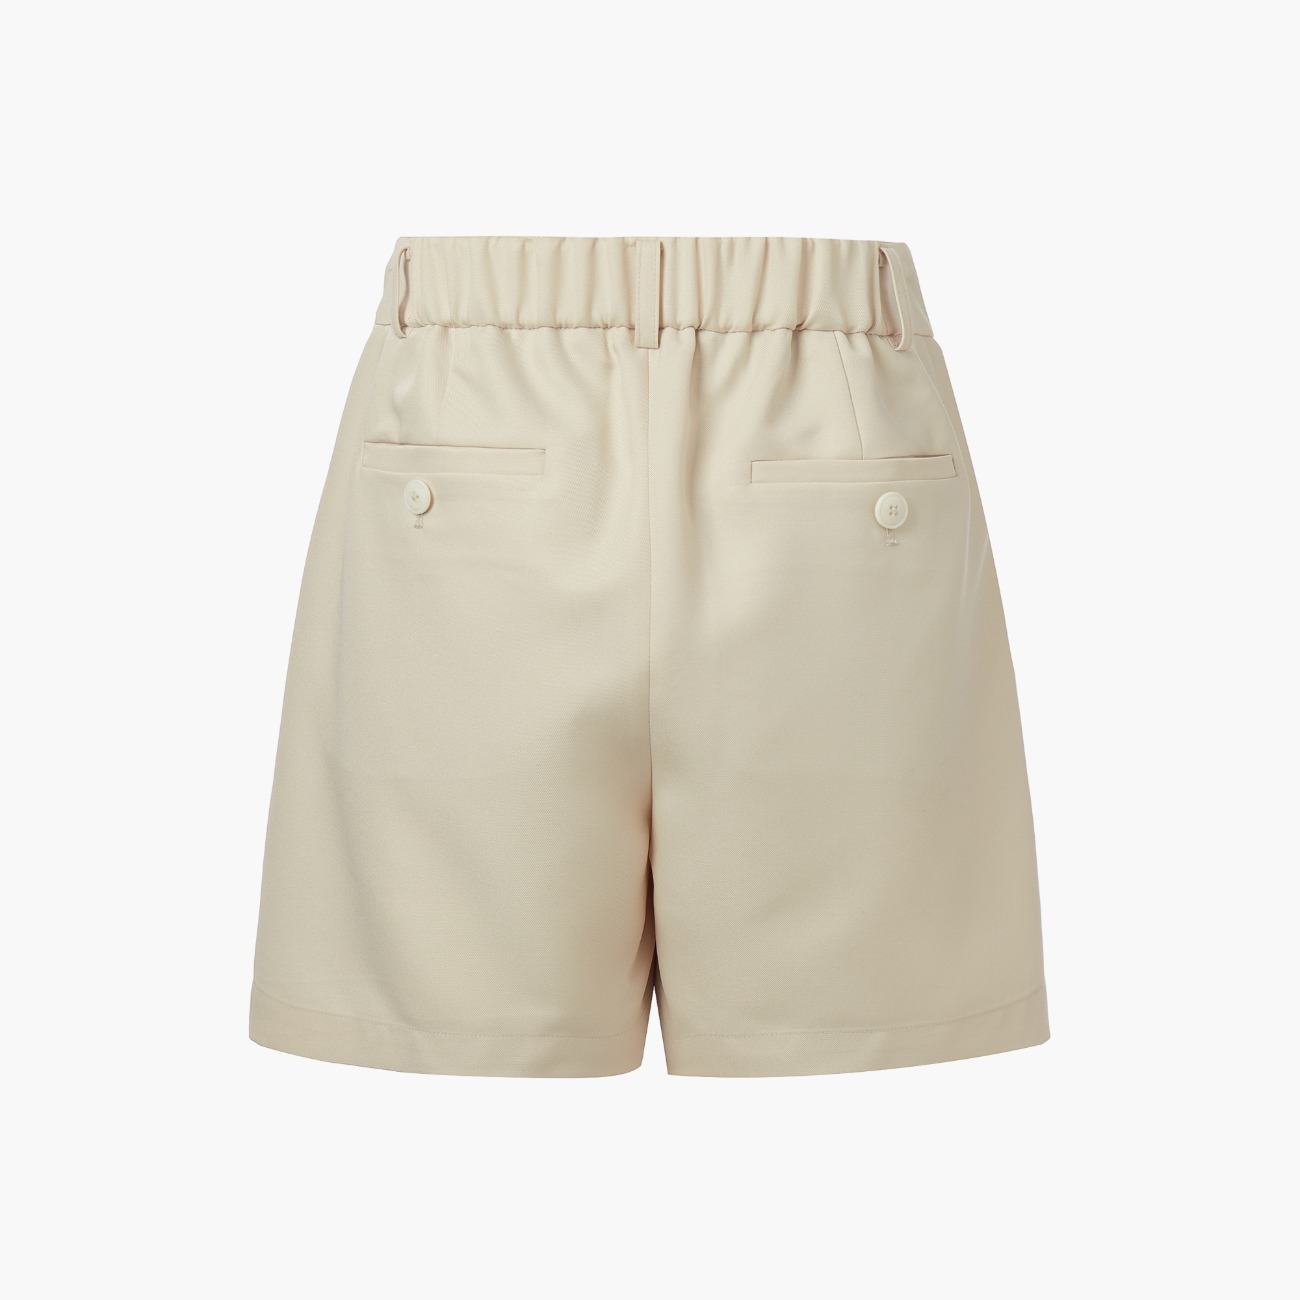 [Re-Stocked] FRONT POCKET BANDED SHORTS, CREAM